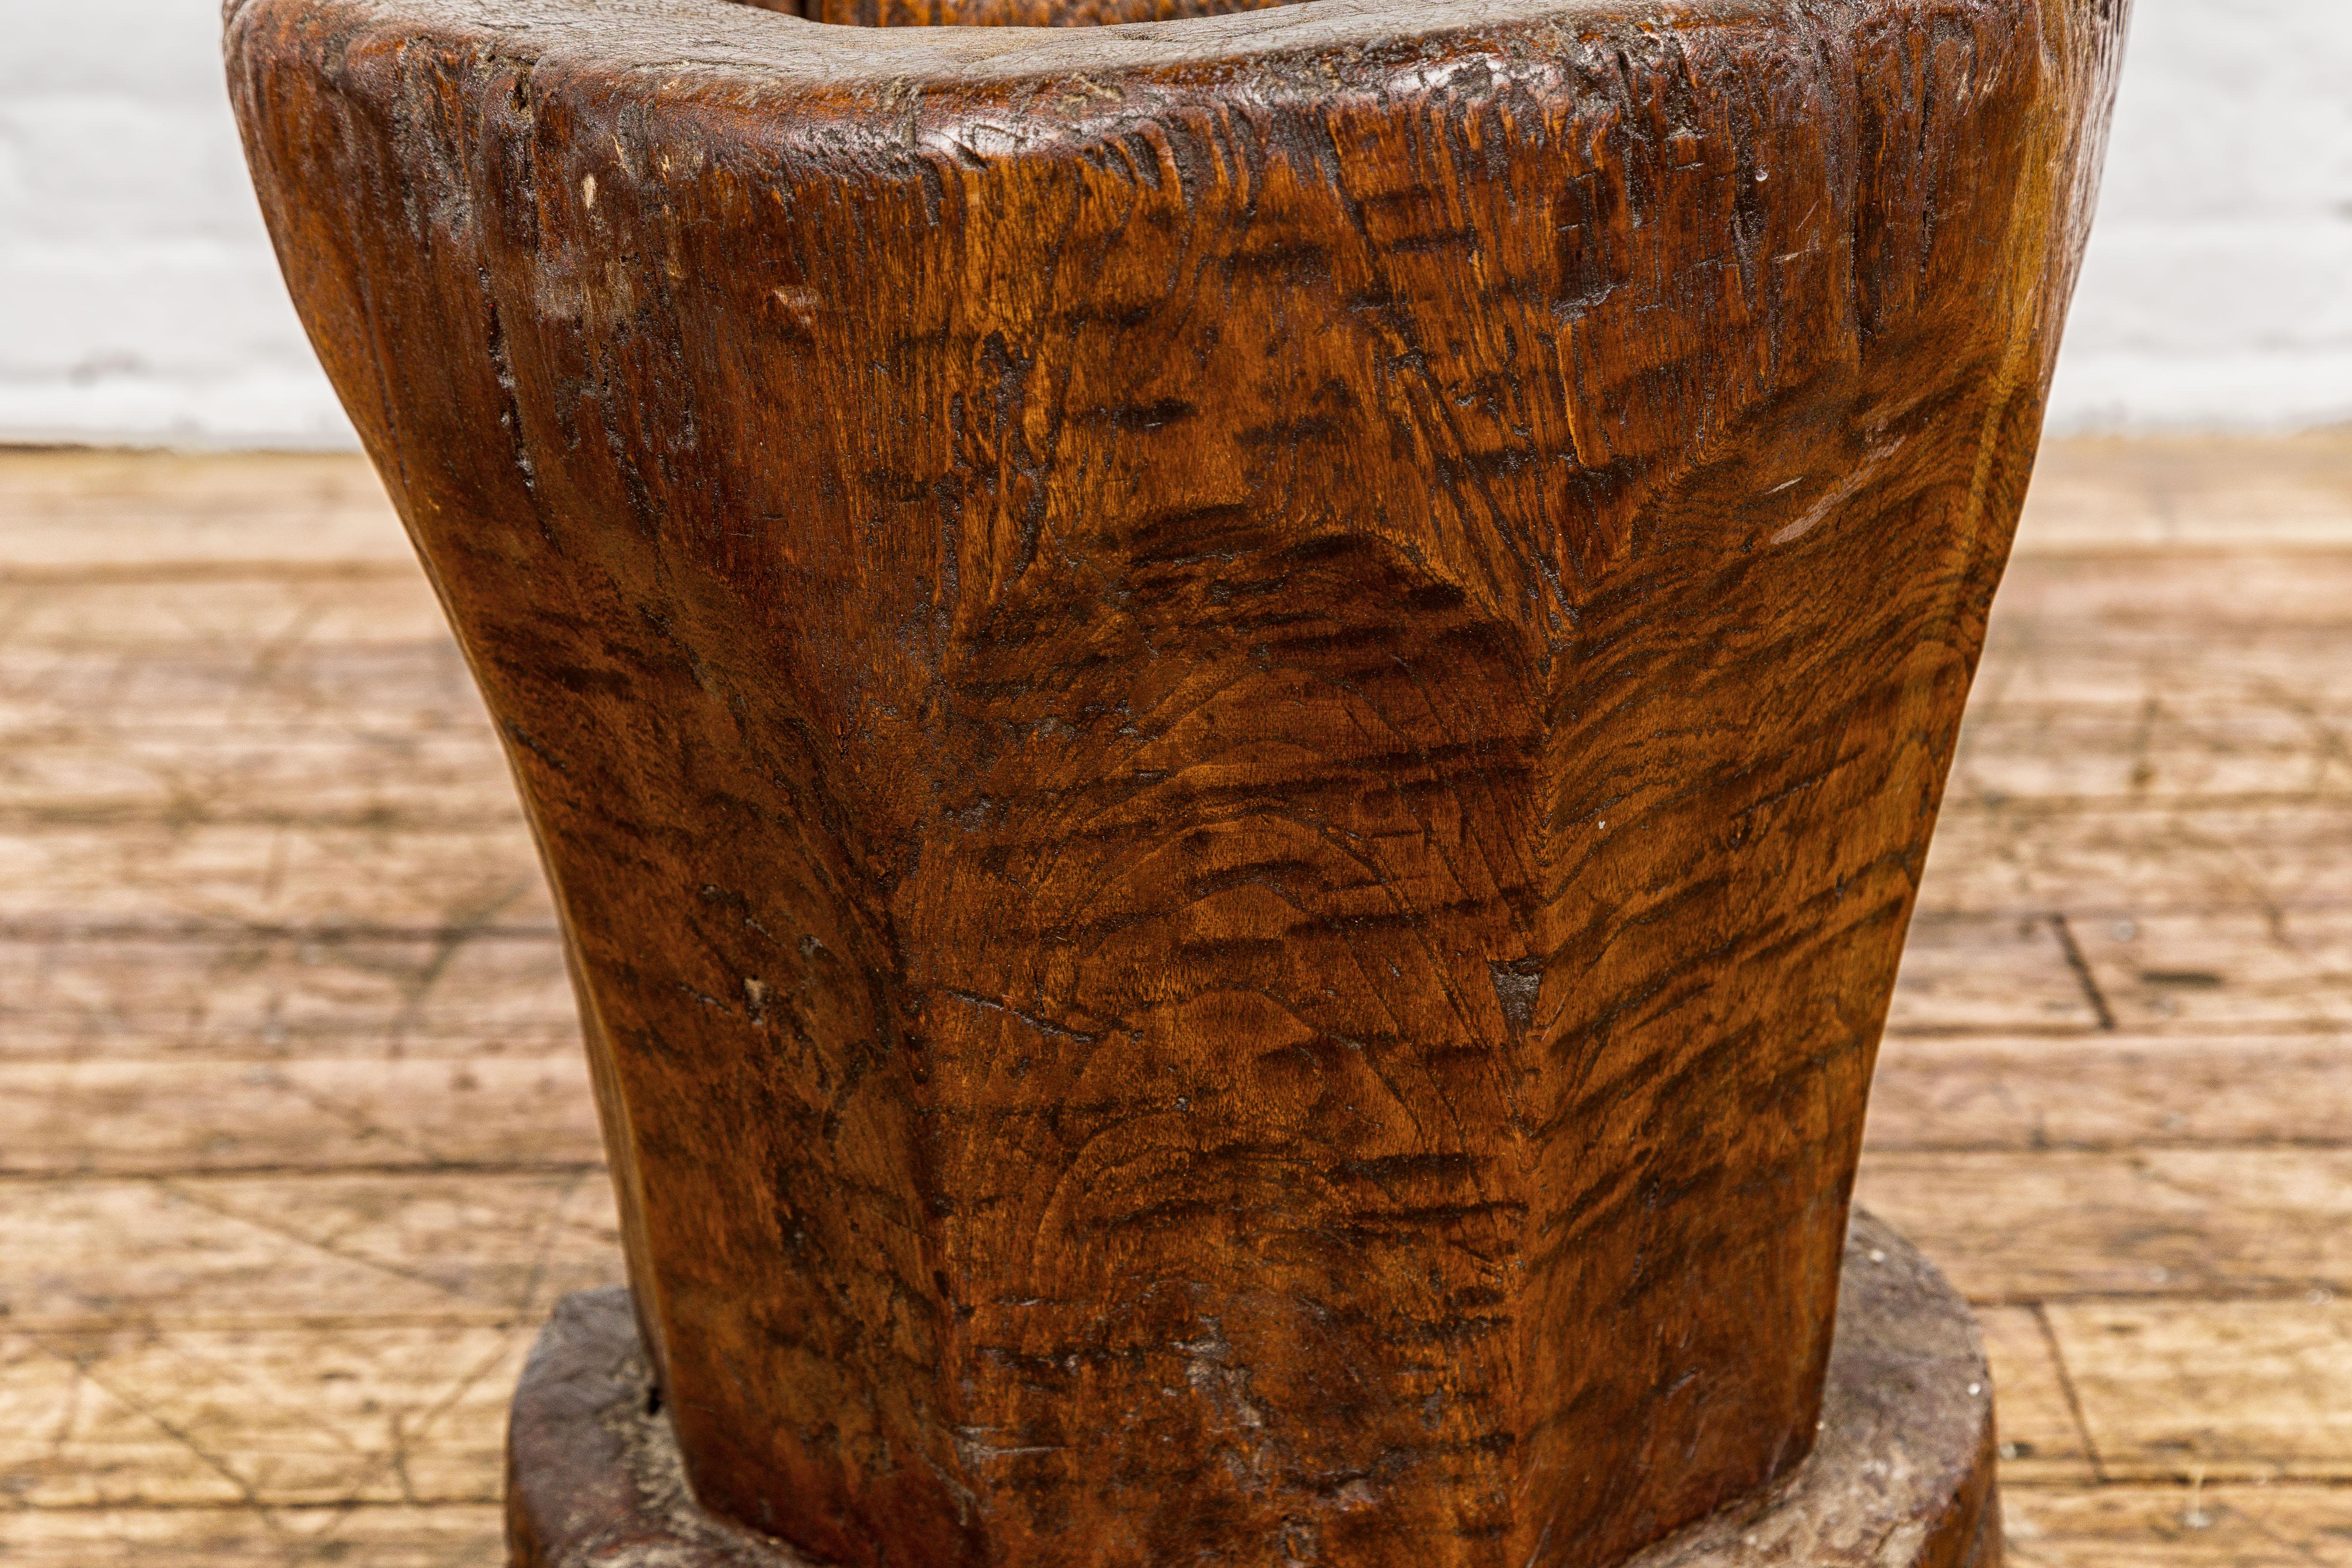 Teak Wood Rustic Mortar Urn Repurposed as an Antique Planter, 19th Century In Good Condition For Sale In Yonkers, NY